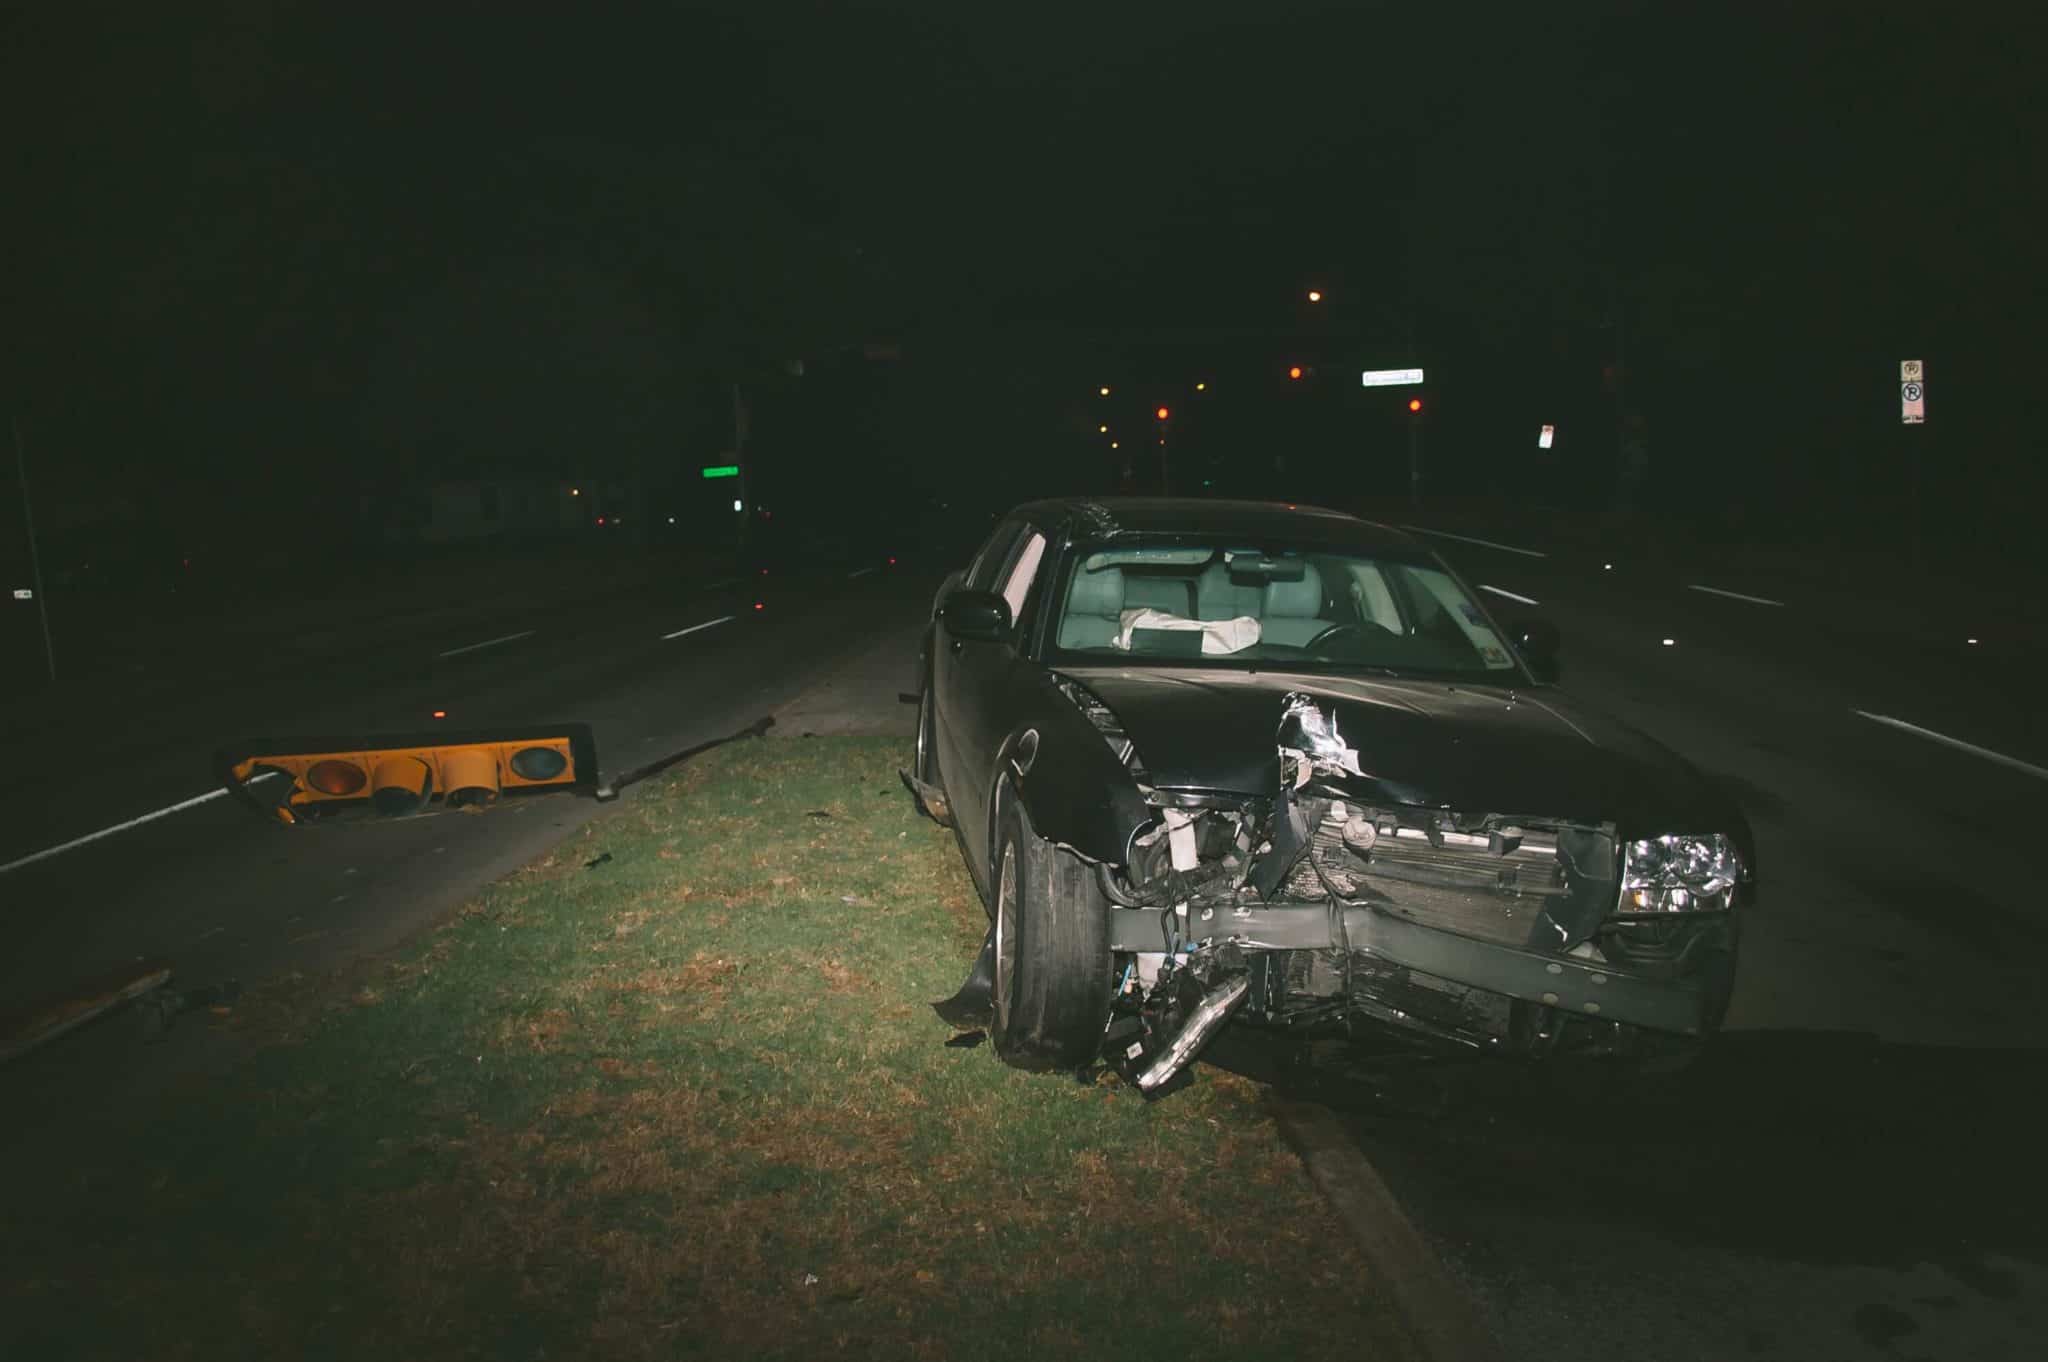 A car accident caused by DUI.